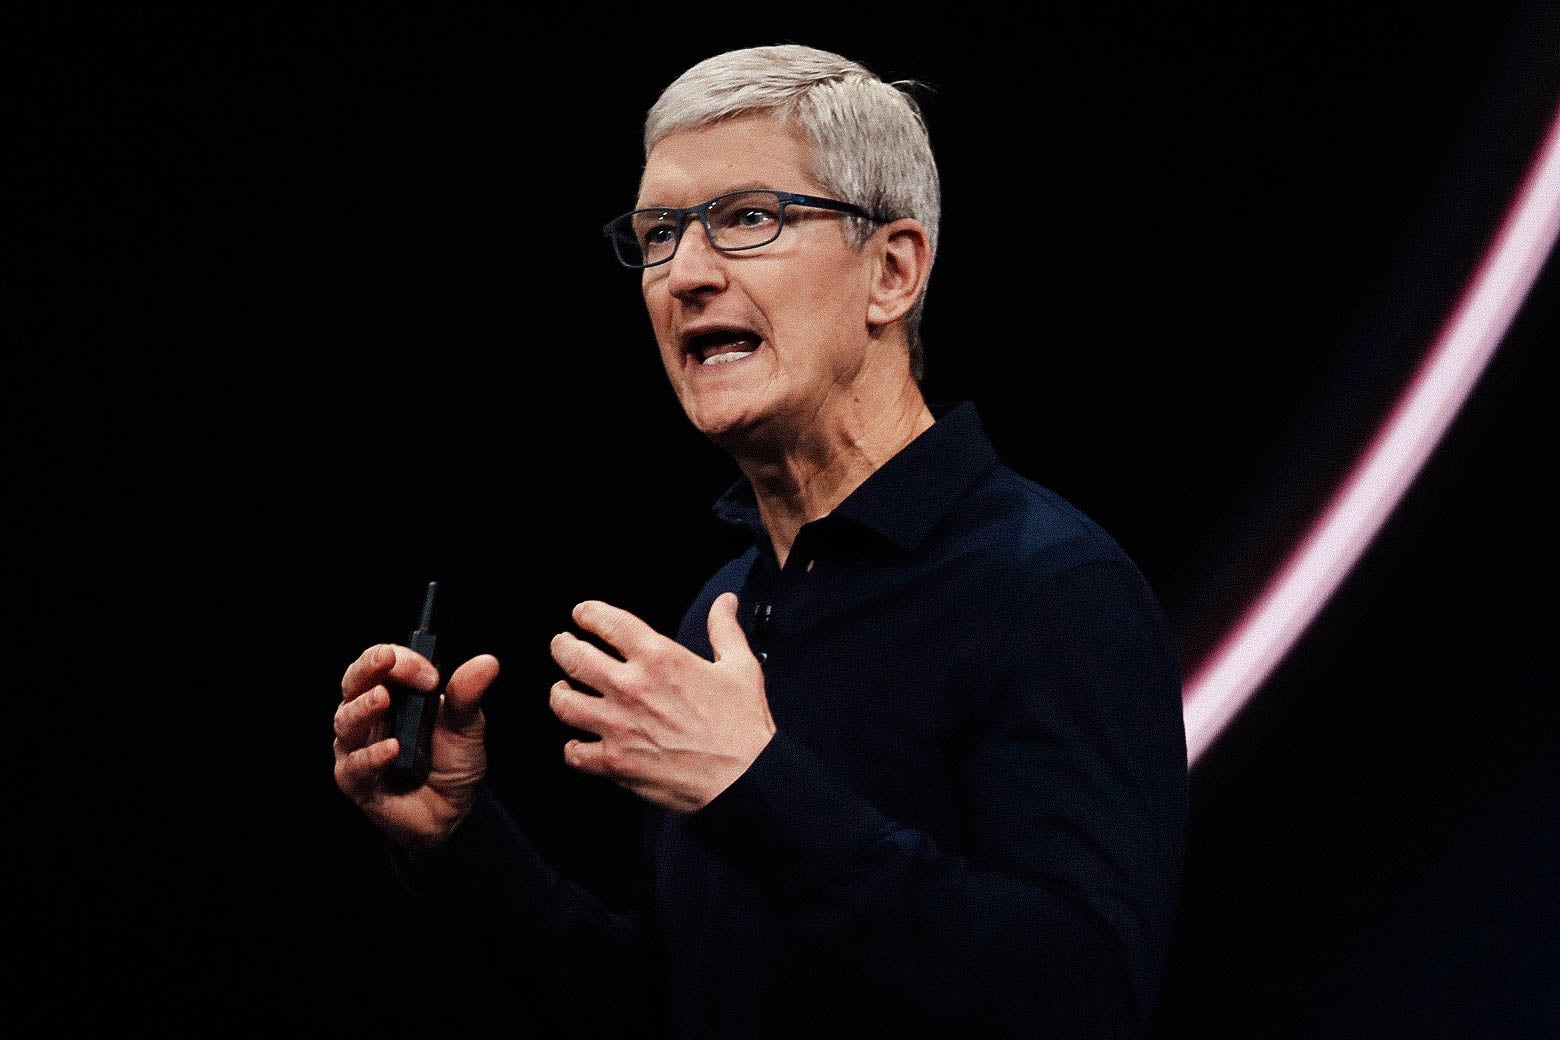 Apple CEO Tim Cook delivers the keynote address during the 2019 Apple Worldwide Developer Conference